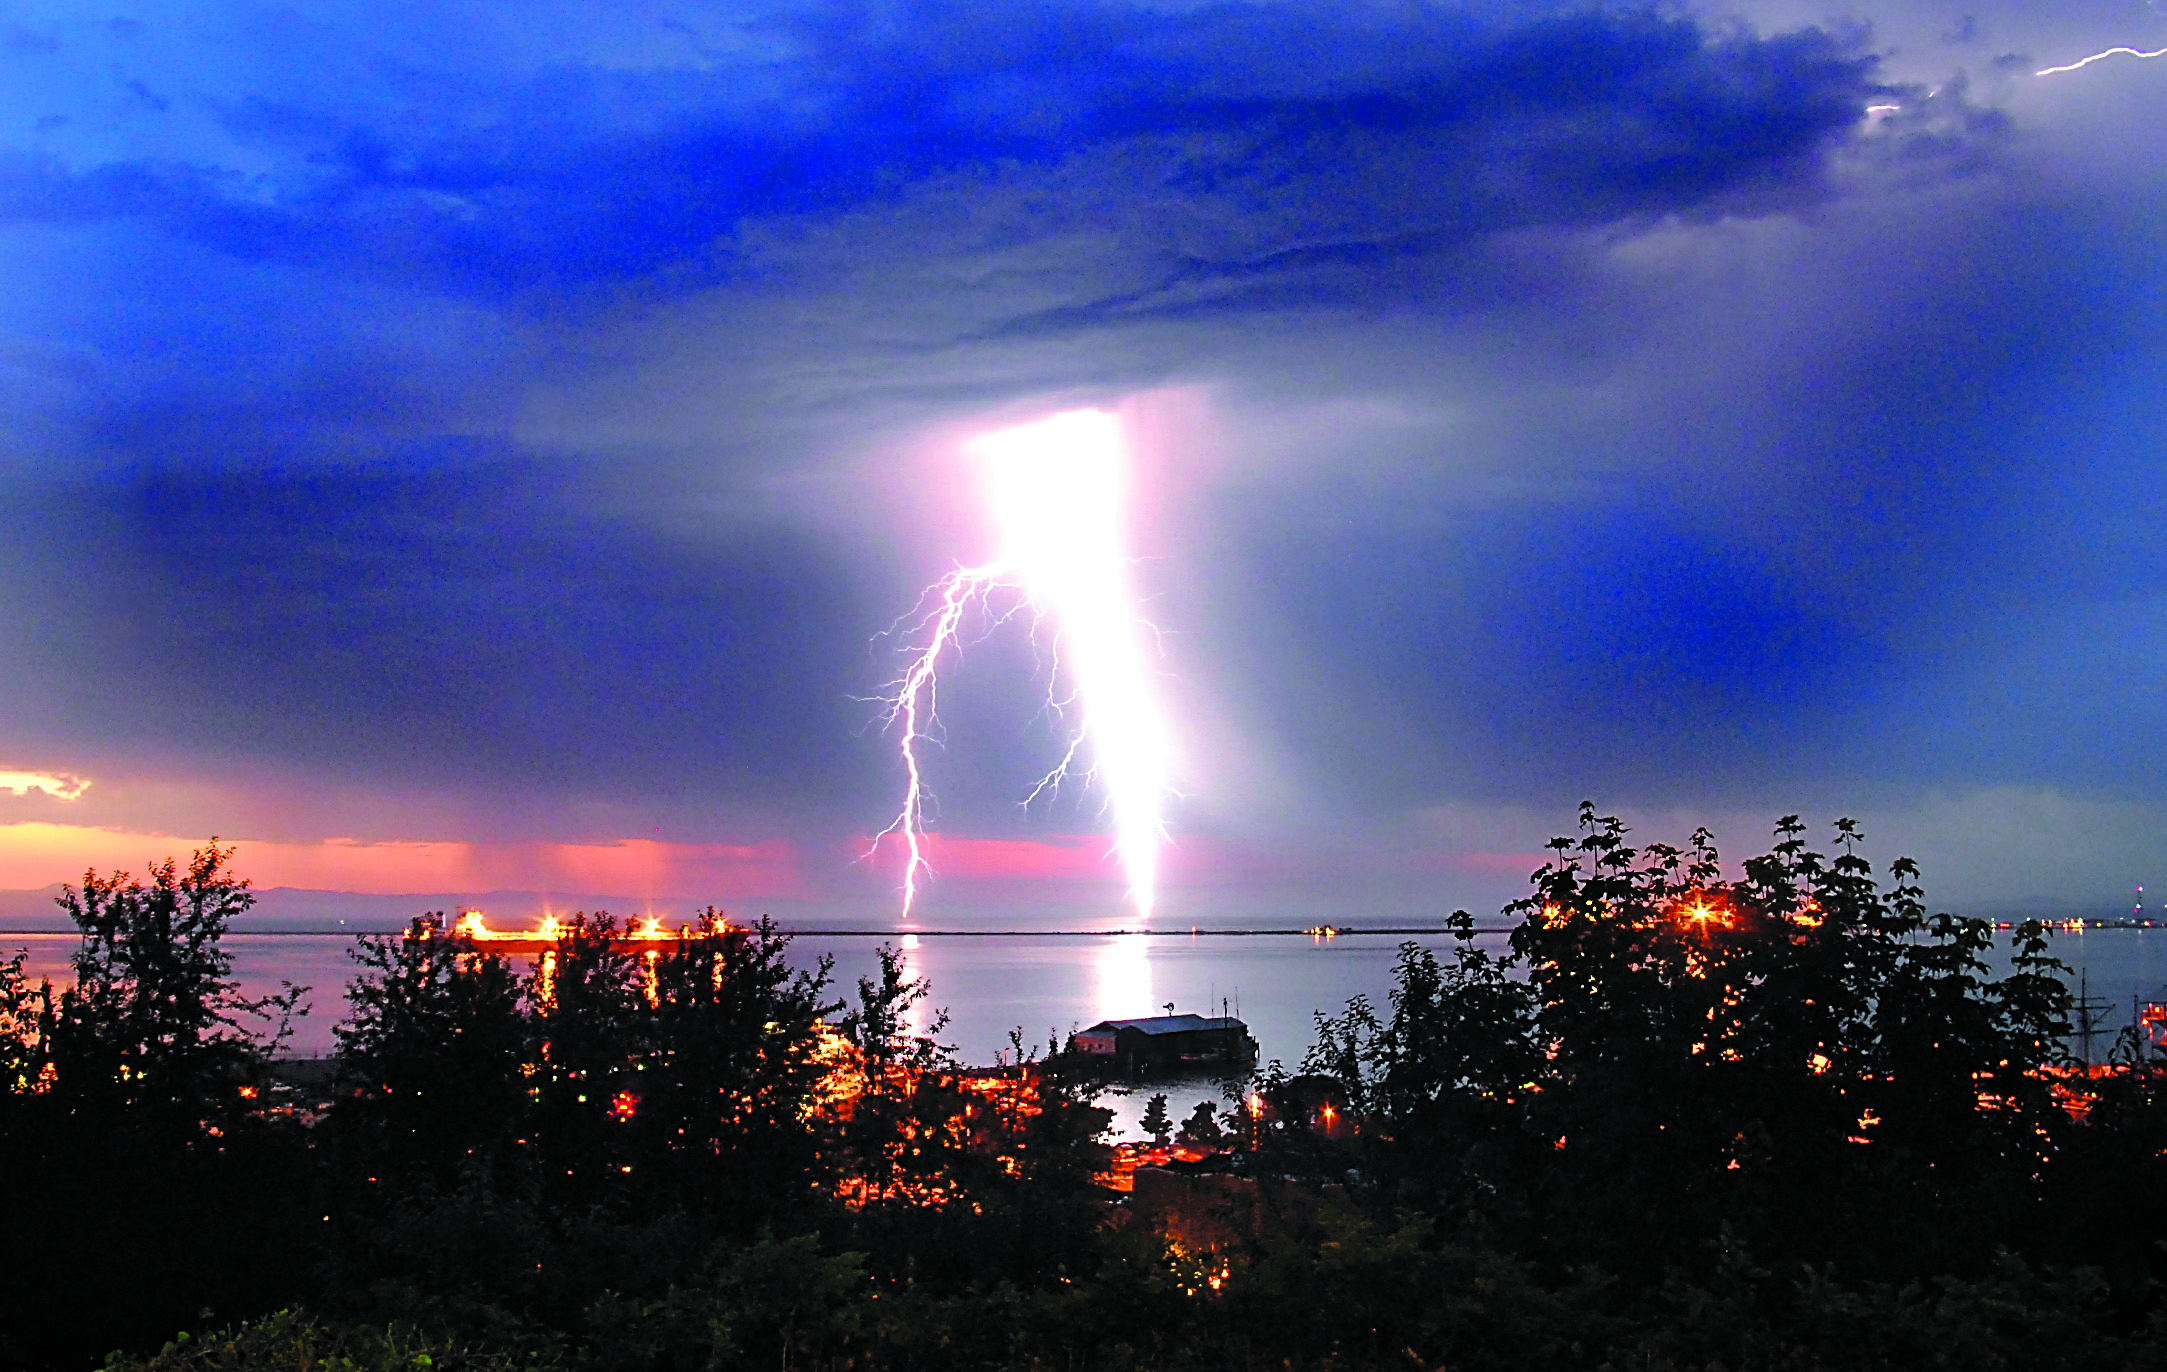 This unusually fat lightning bolt over the Strait of Juan de Fuca was taken from Port Angeles on Friday evening. Port Angeles Harbor and Ediz Hook are visible in the foreground.  -- Photo by Keith Thorpe/Peninsula Daily News